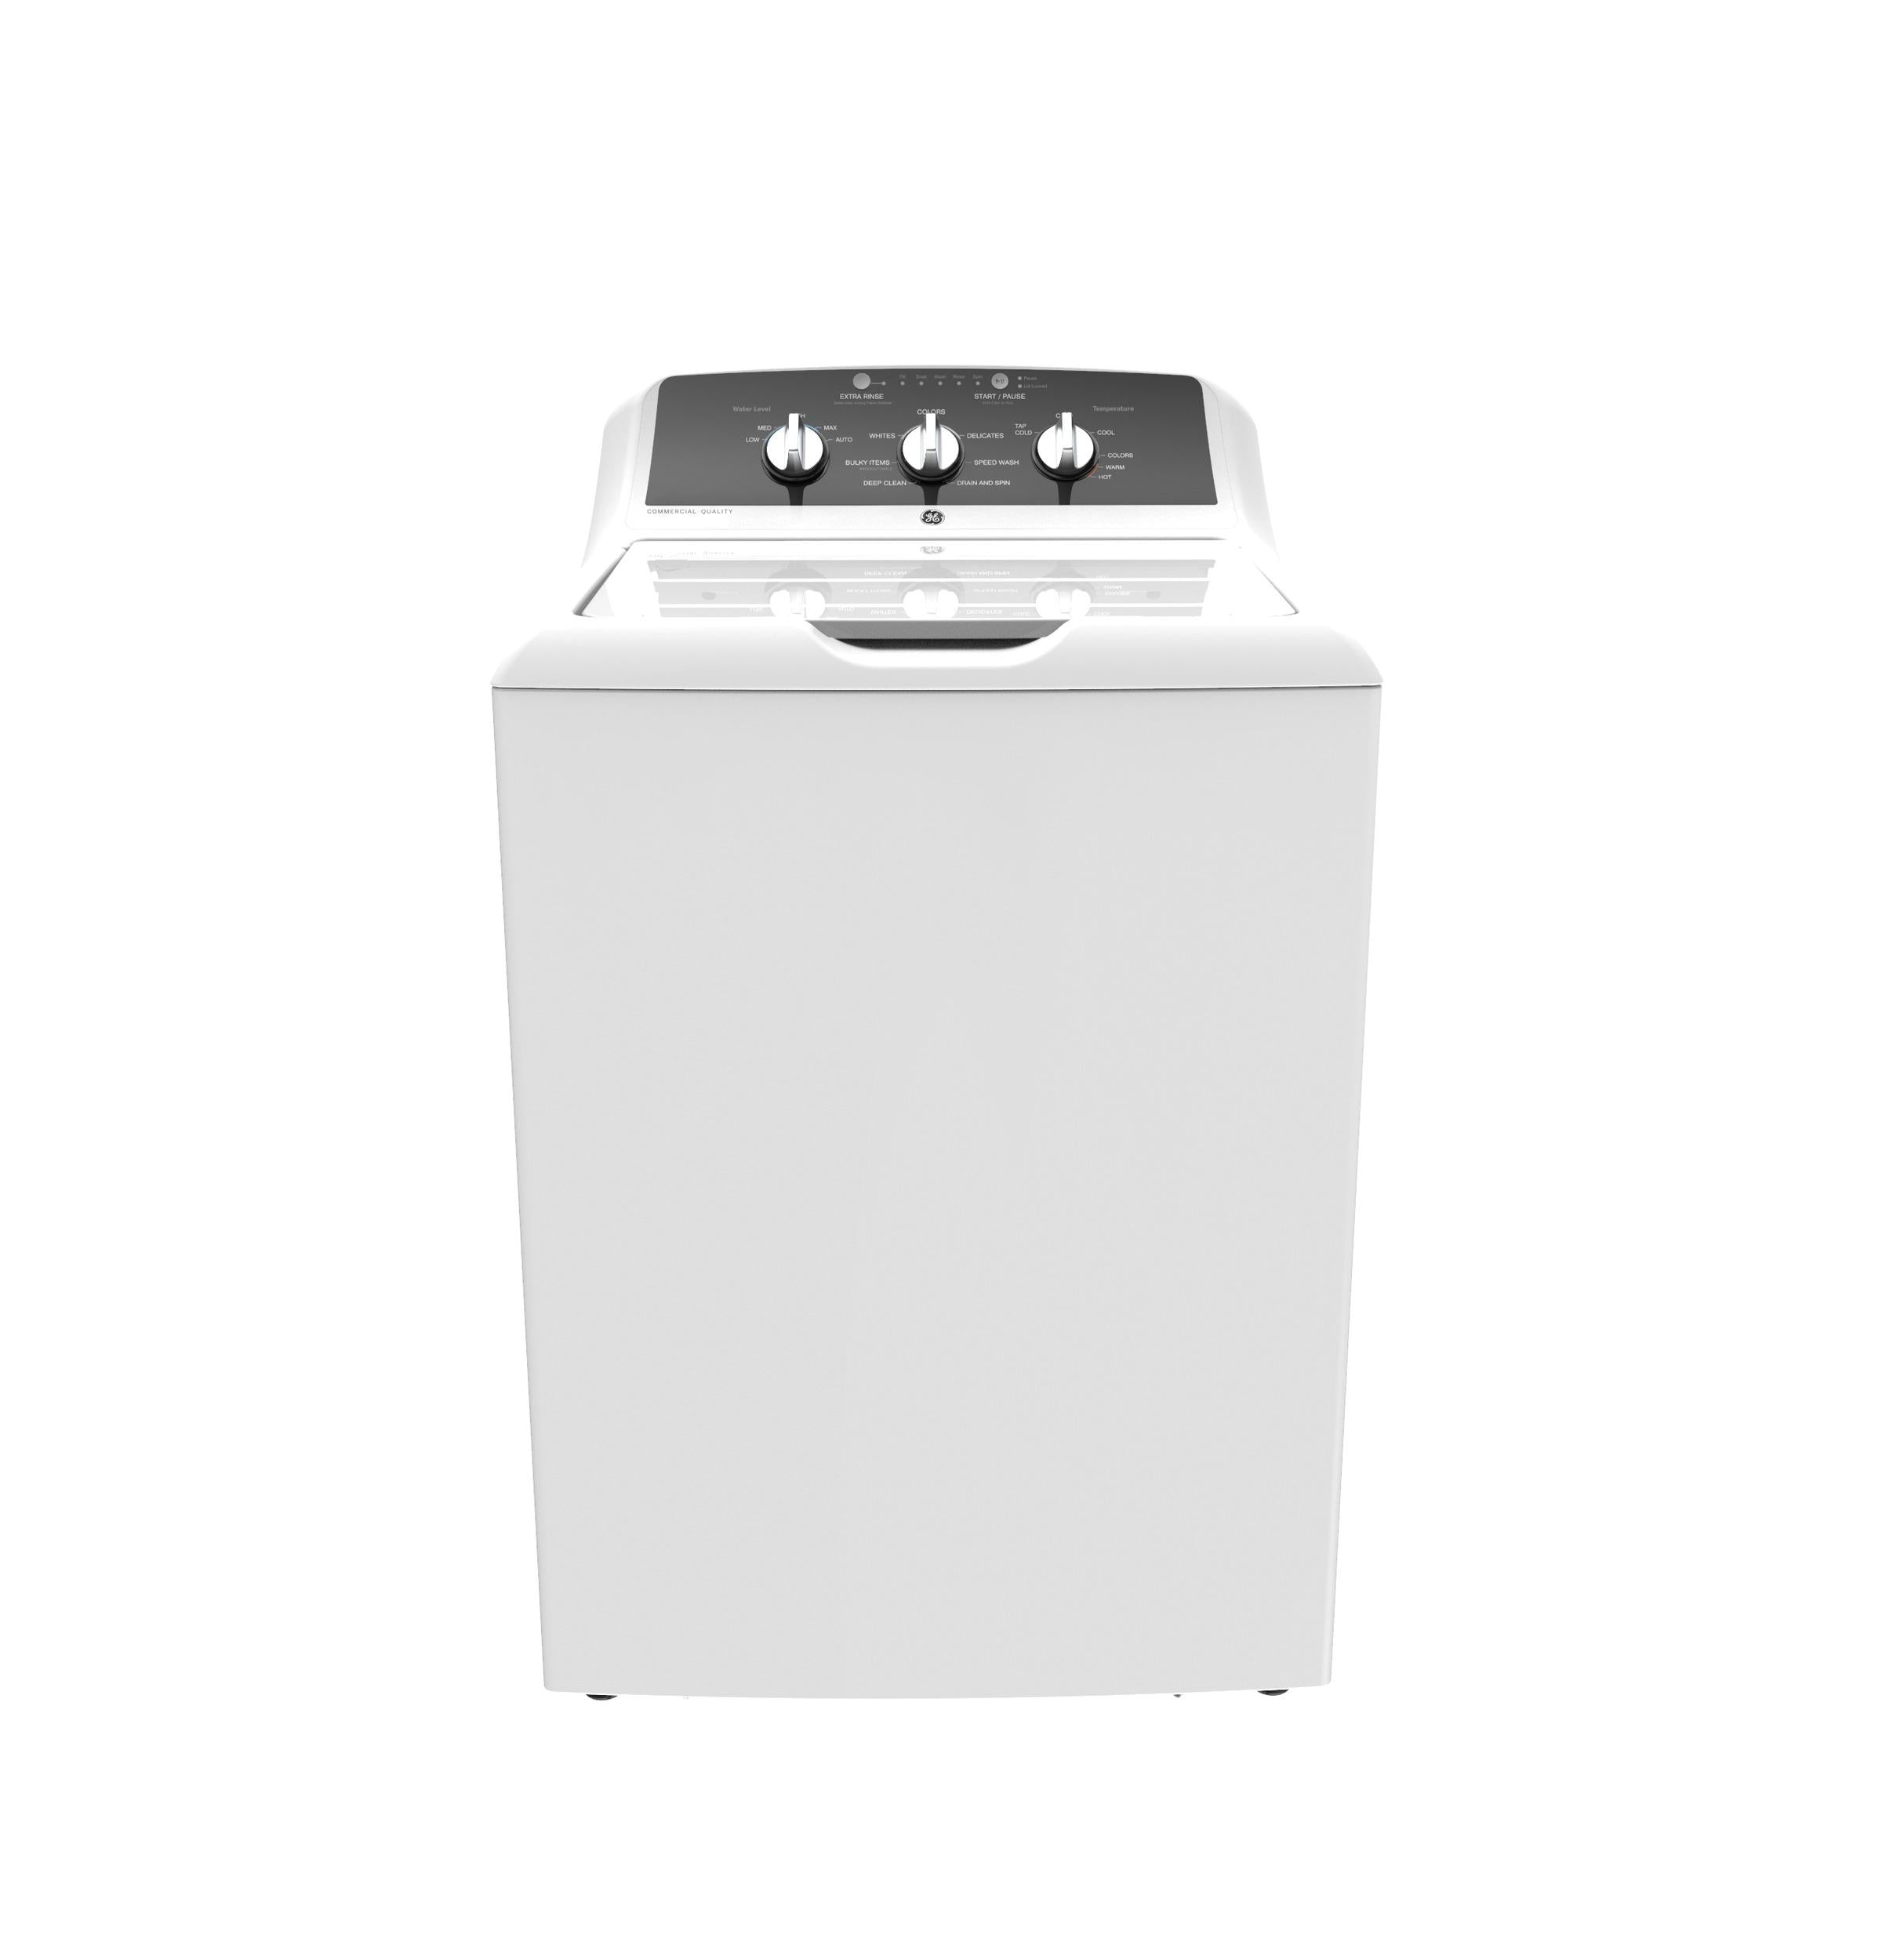 GE APPLIANCES GE(R) 4.2 cu. ft. Capacity Washer with Stainless Steel Basket